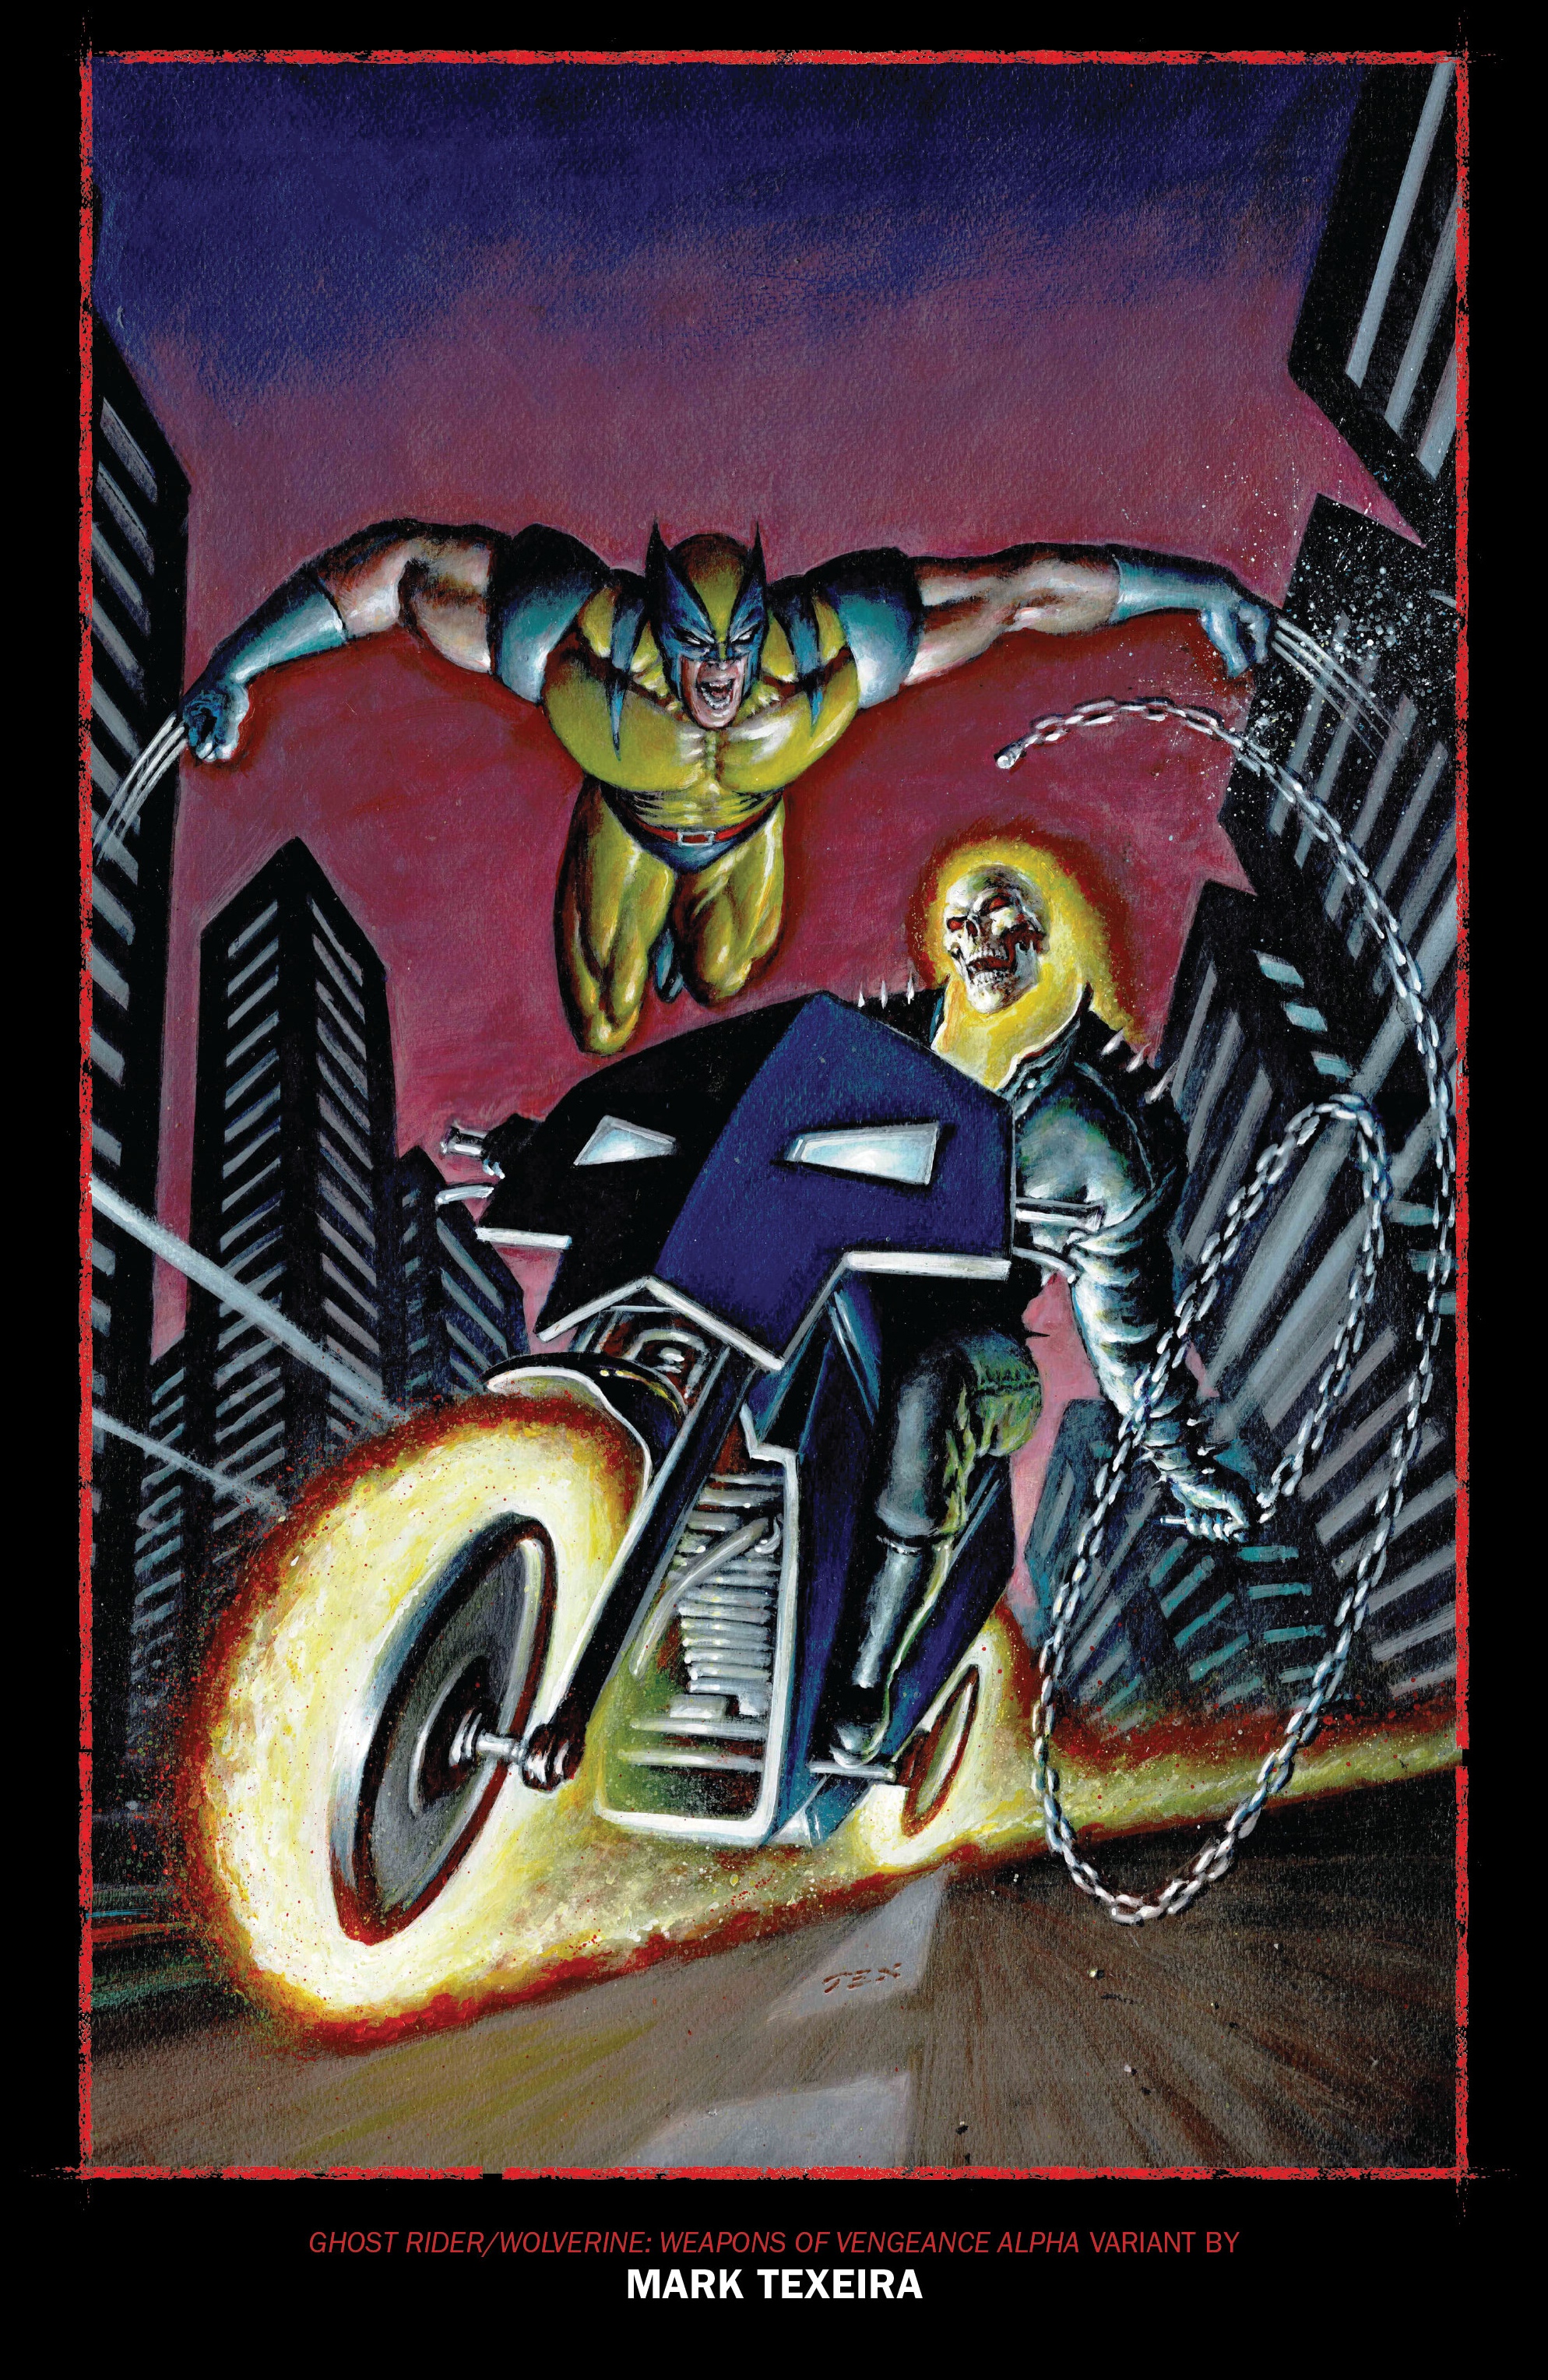 Read online Ghost Rider/Wolverine: Weapons of Vengeance comic -  Issue # TPB - 110